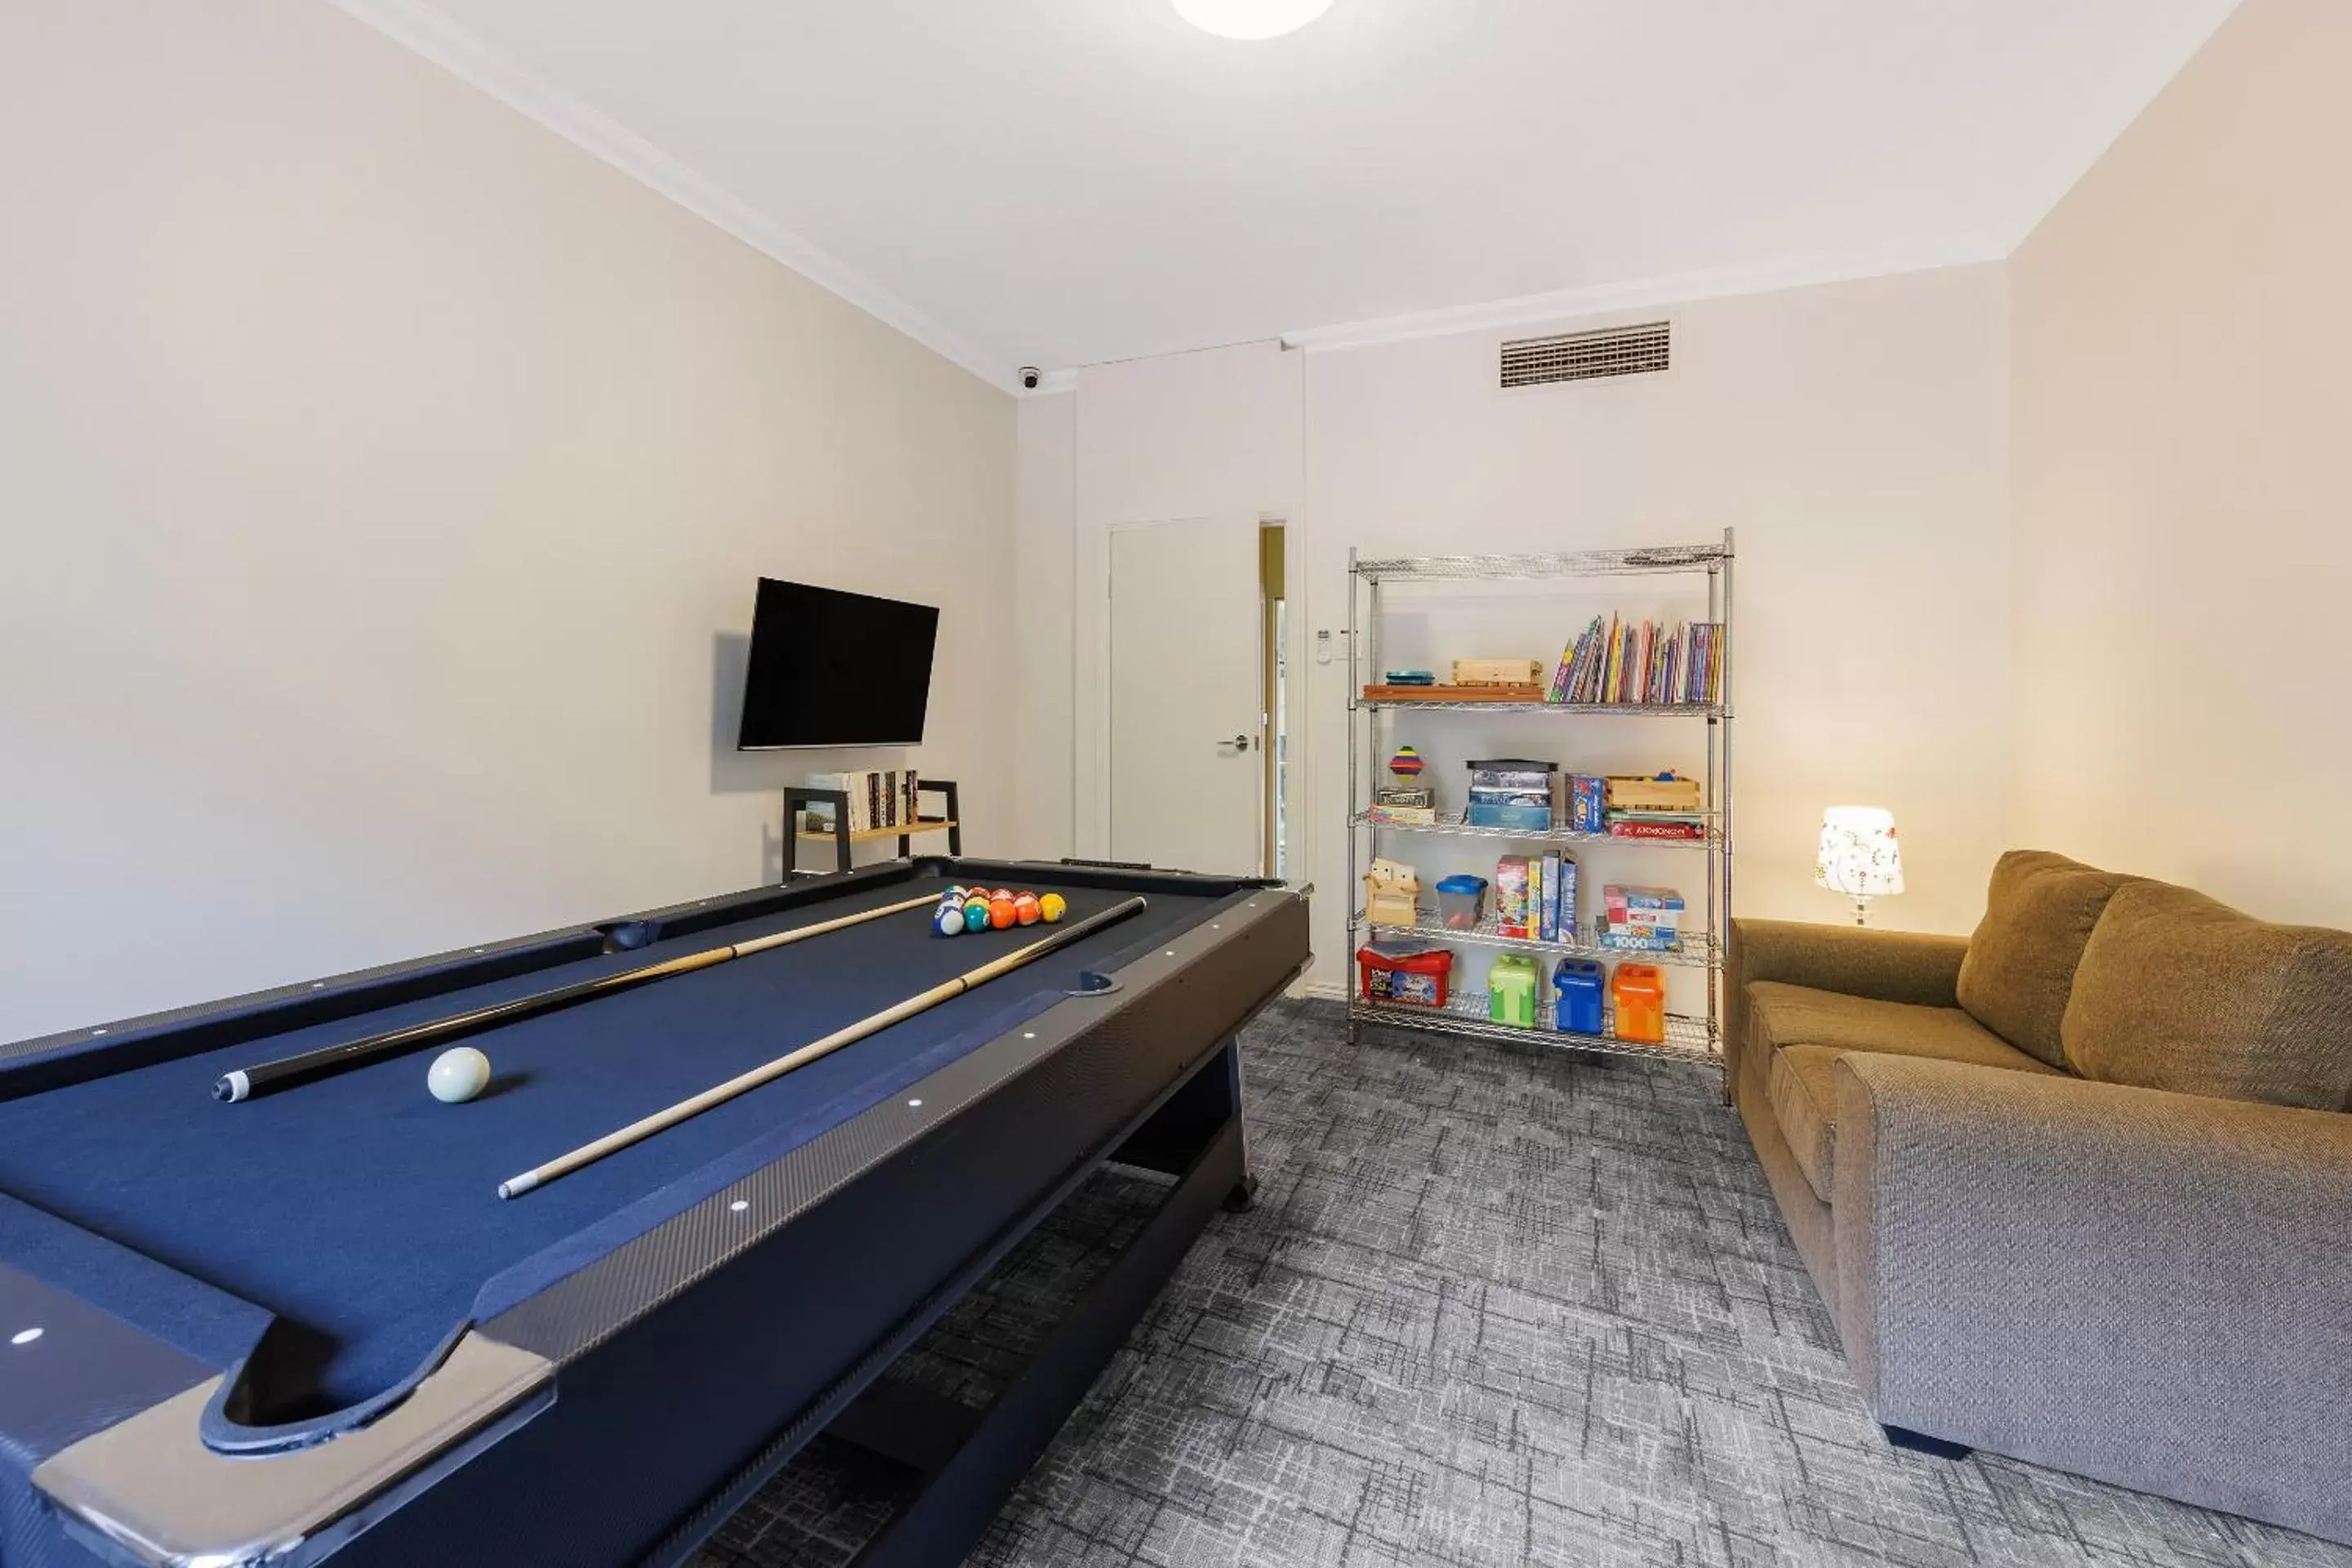 Game Room, Billiards in Kimberley Gardens Hotel, Serviced Apartments and Serviced Villas